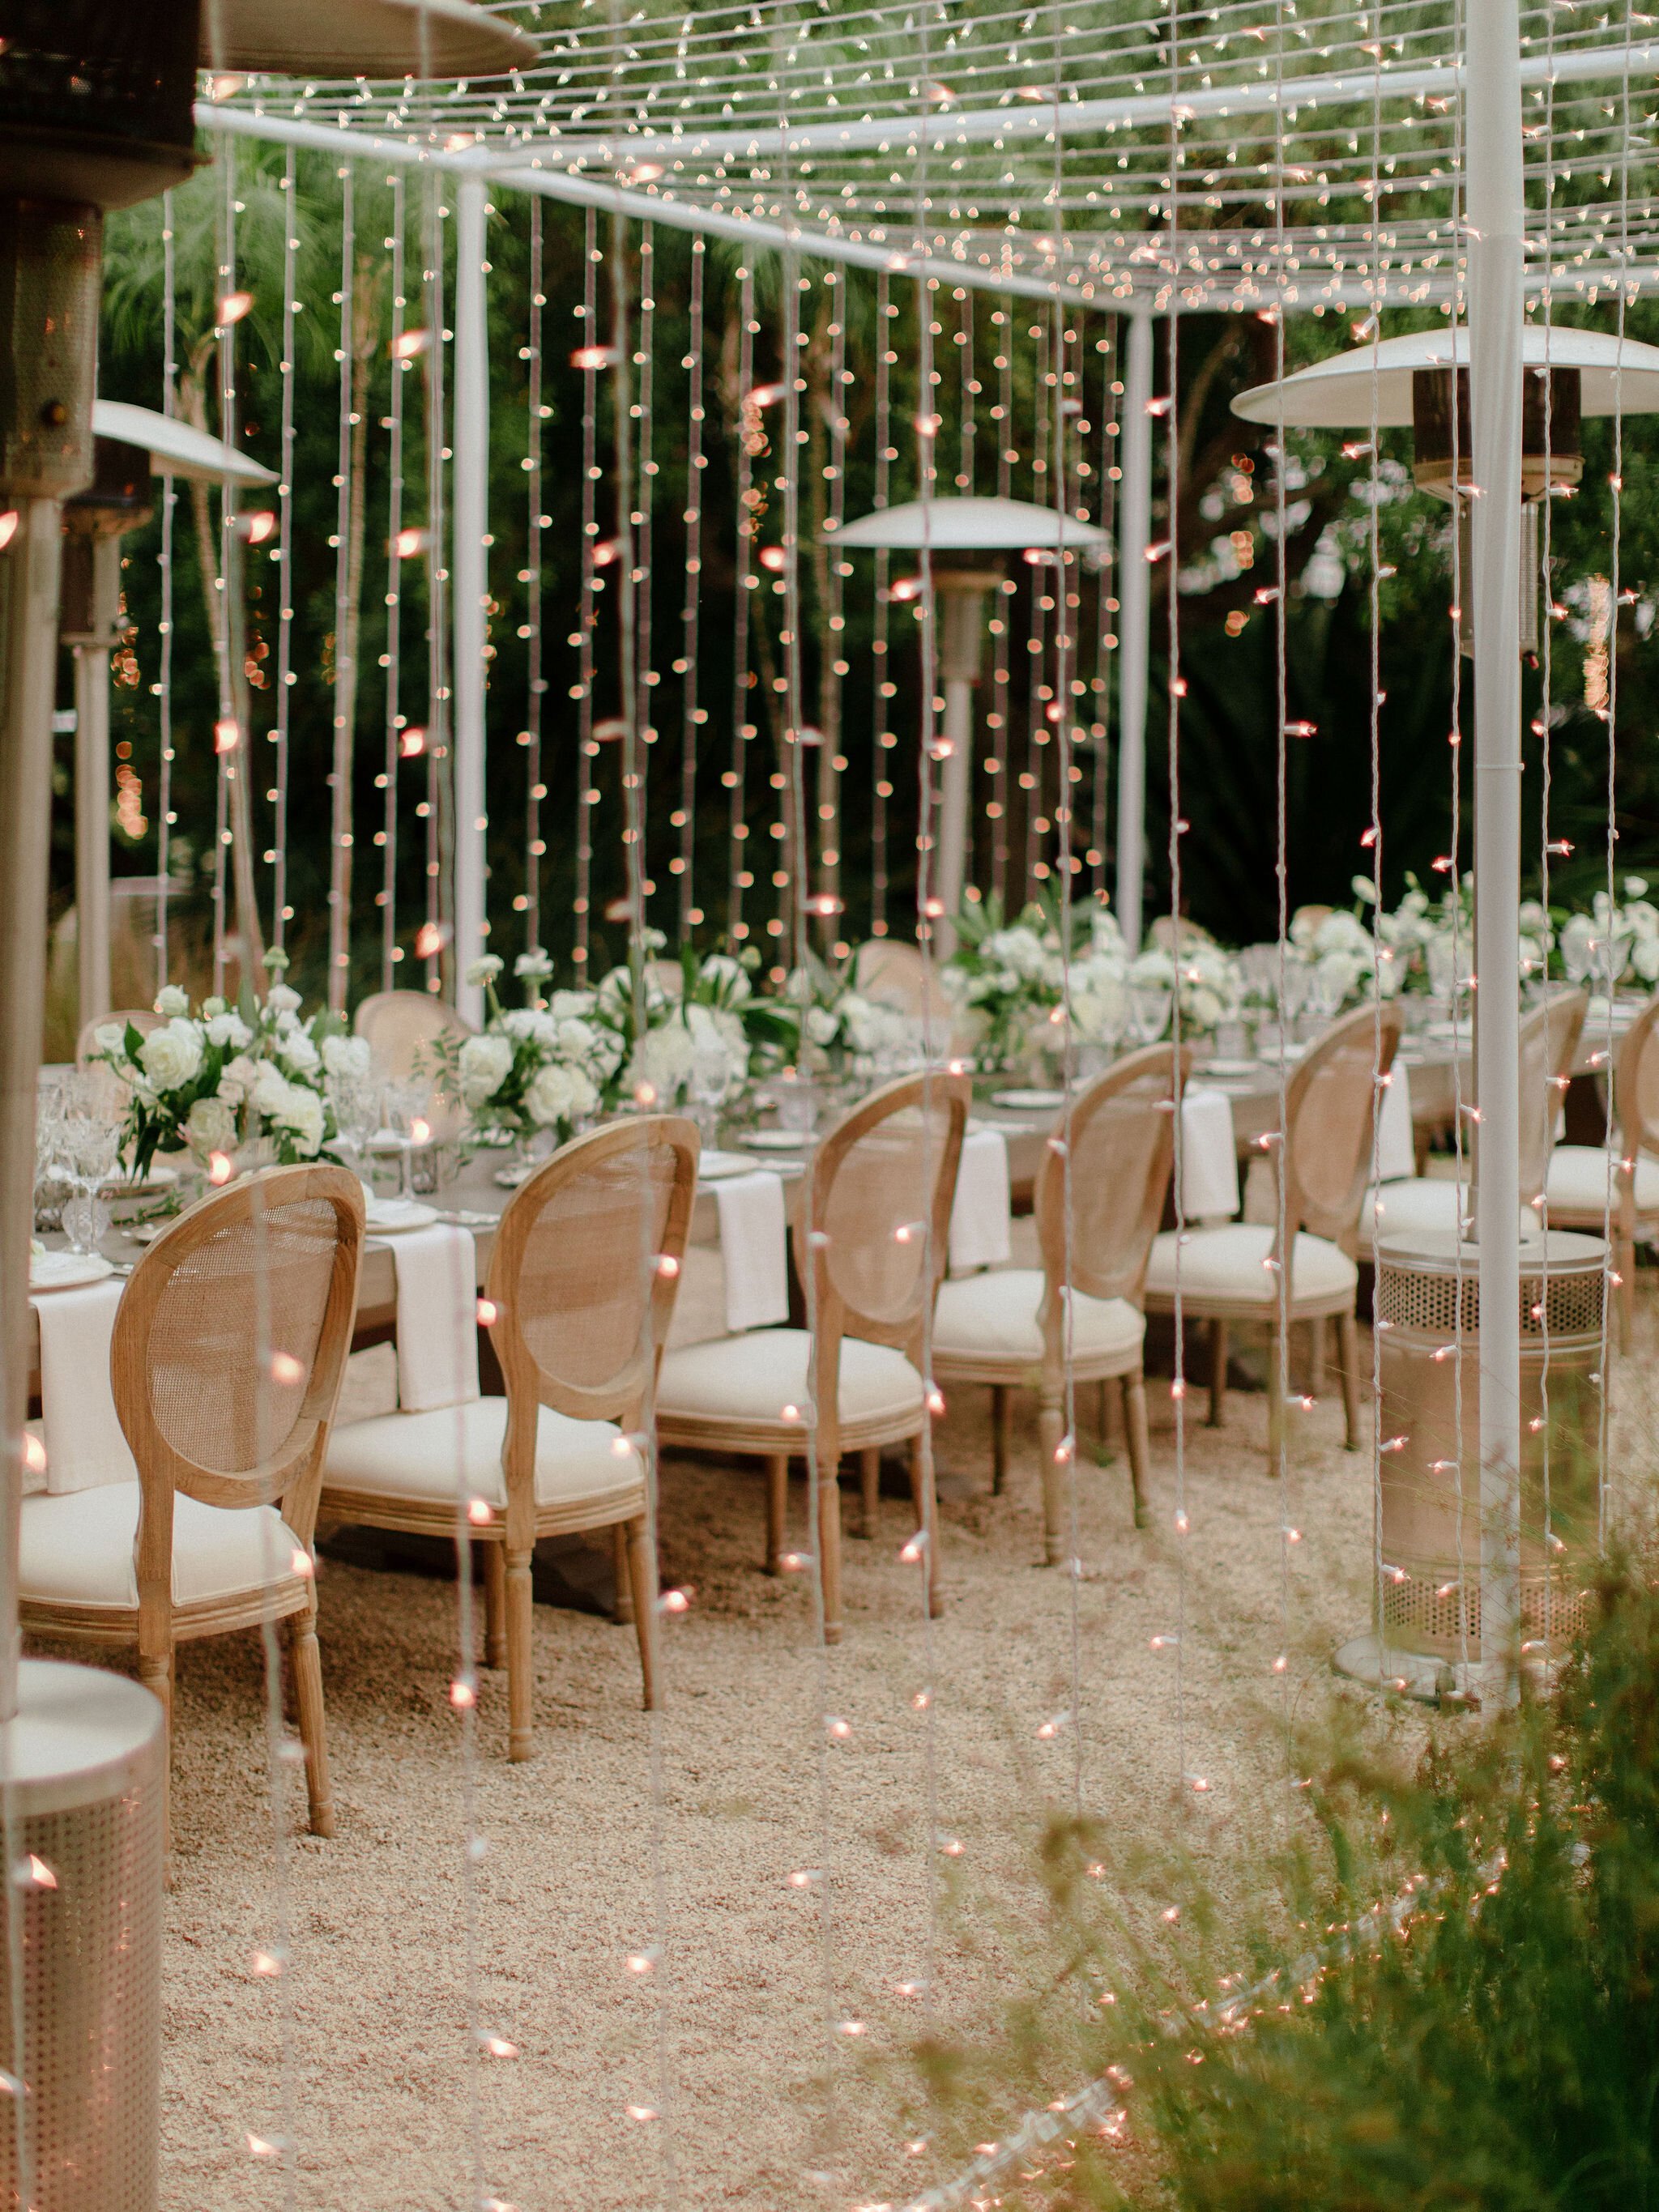 www.santabarbaraweddings.com | Chris J. Evans | Private Residence | Ashley Chanel Events | Rogue &amp; Fox | Reception Table at Night Covered by String Lights